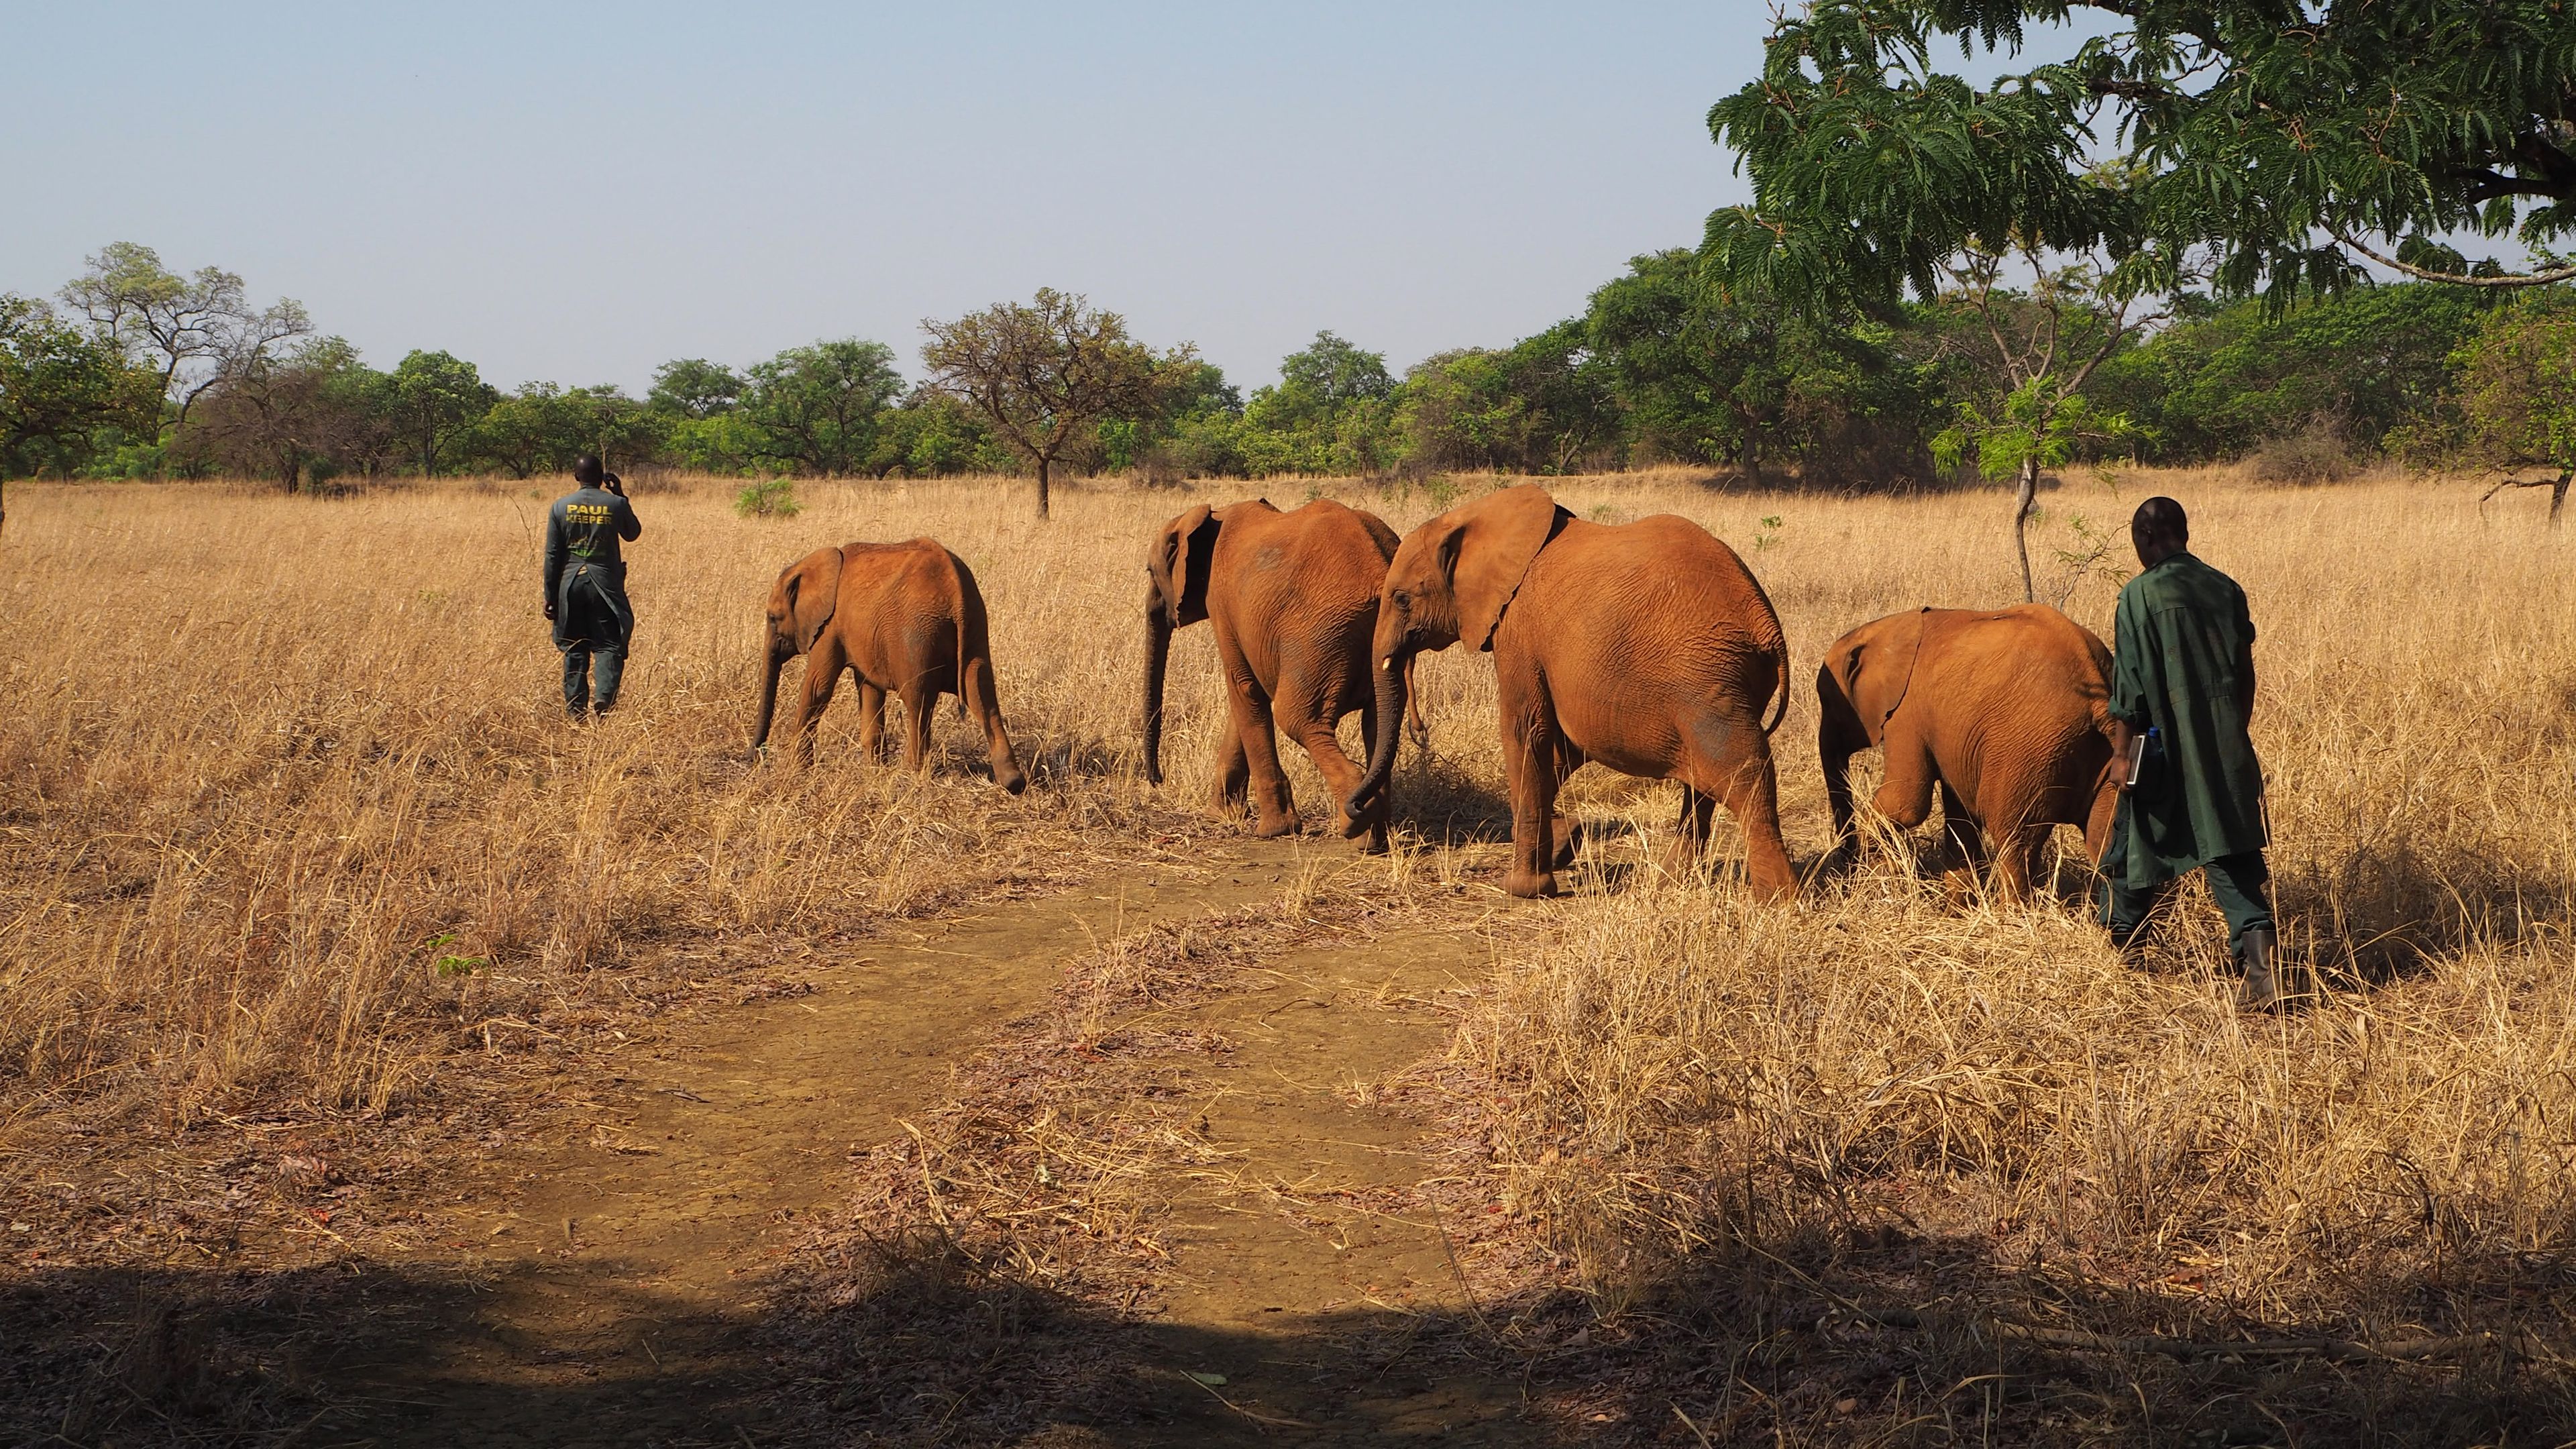 Elephant keepers and elephant orphans in Zambia